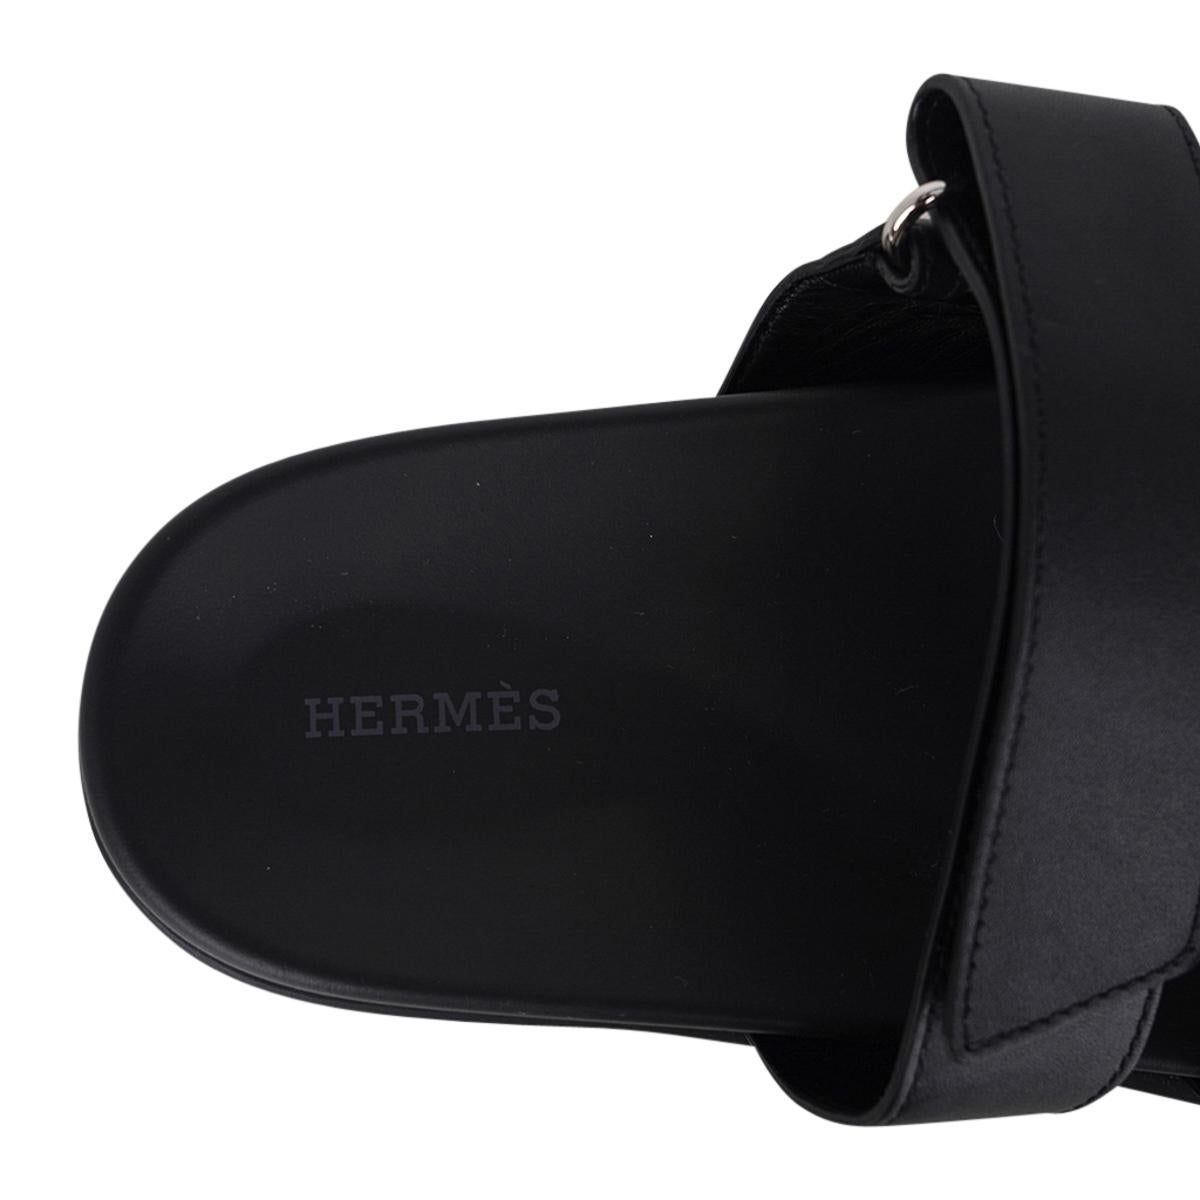 Hermes Men's Chypre Olive Toile Black Leather Trim Sandal 44.5 In New Condition For Sale In Miami, FL